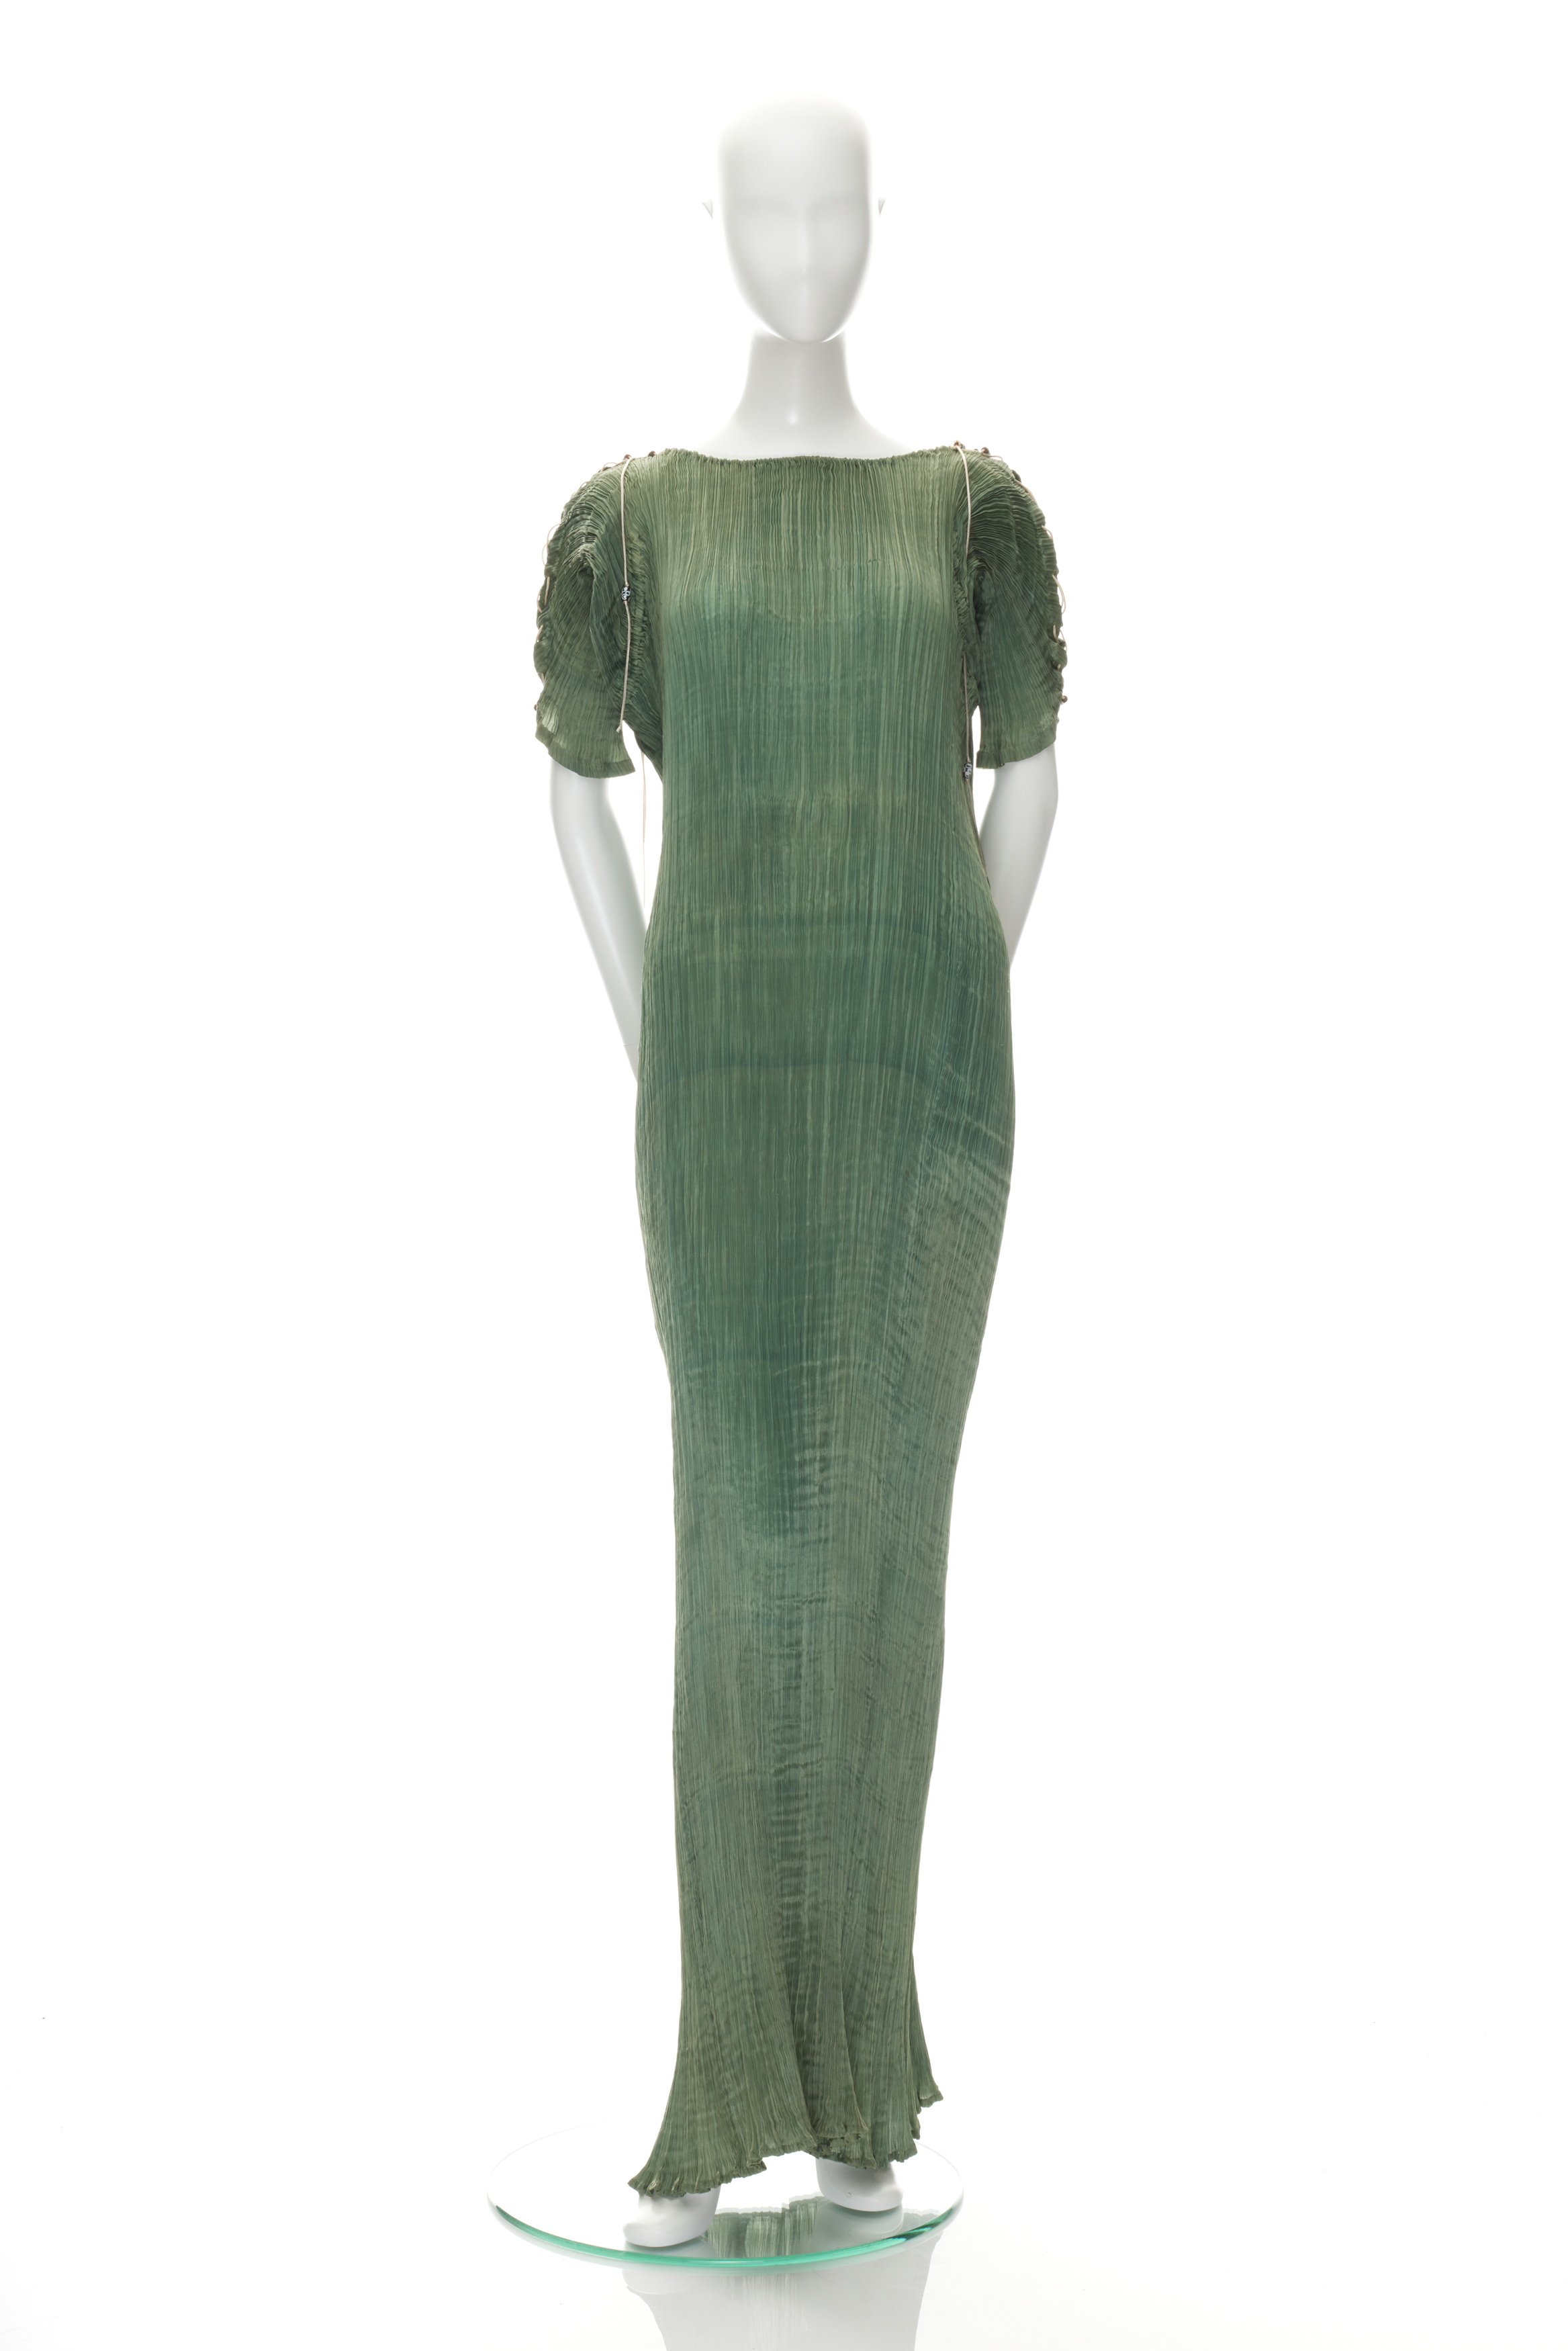 Powerhouse Collection - 'Delphos' evening dress by Mariano Fortuny